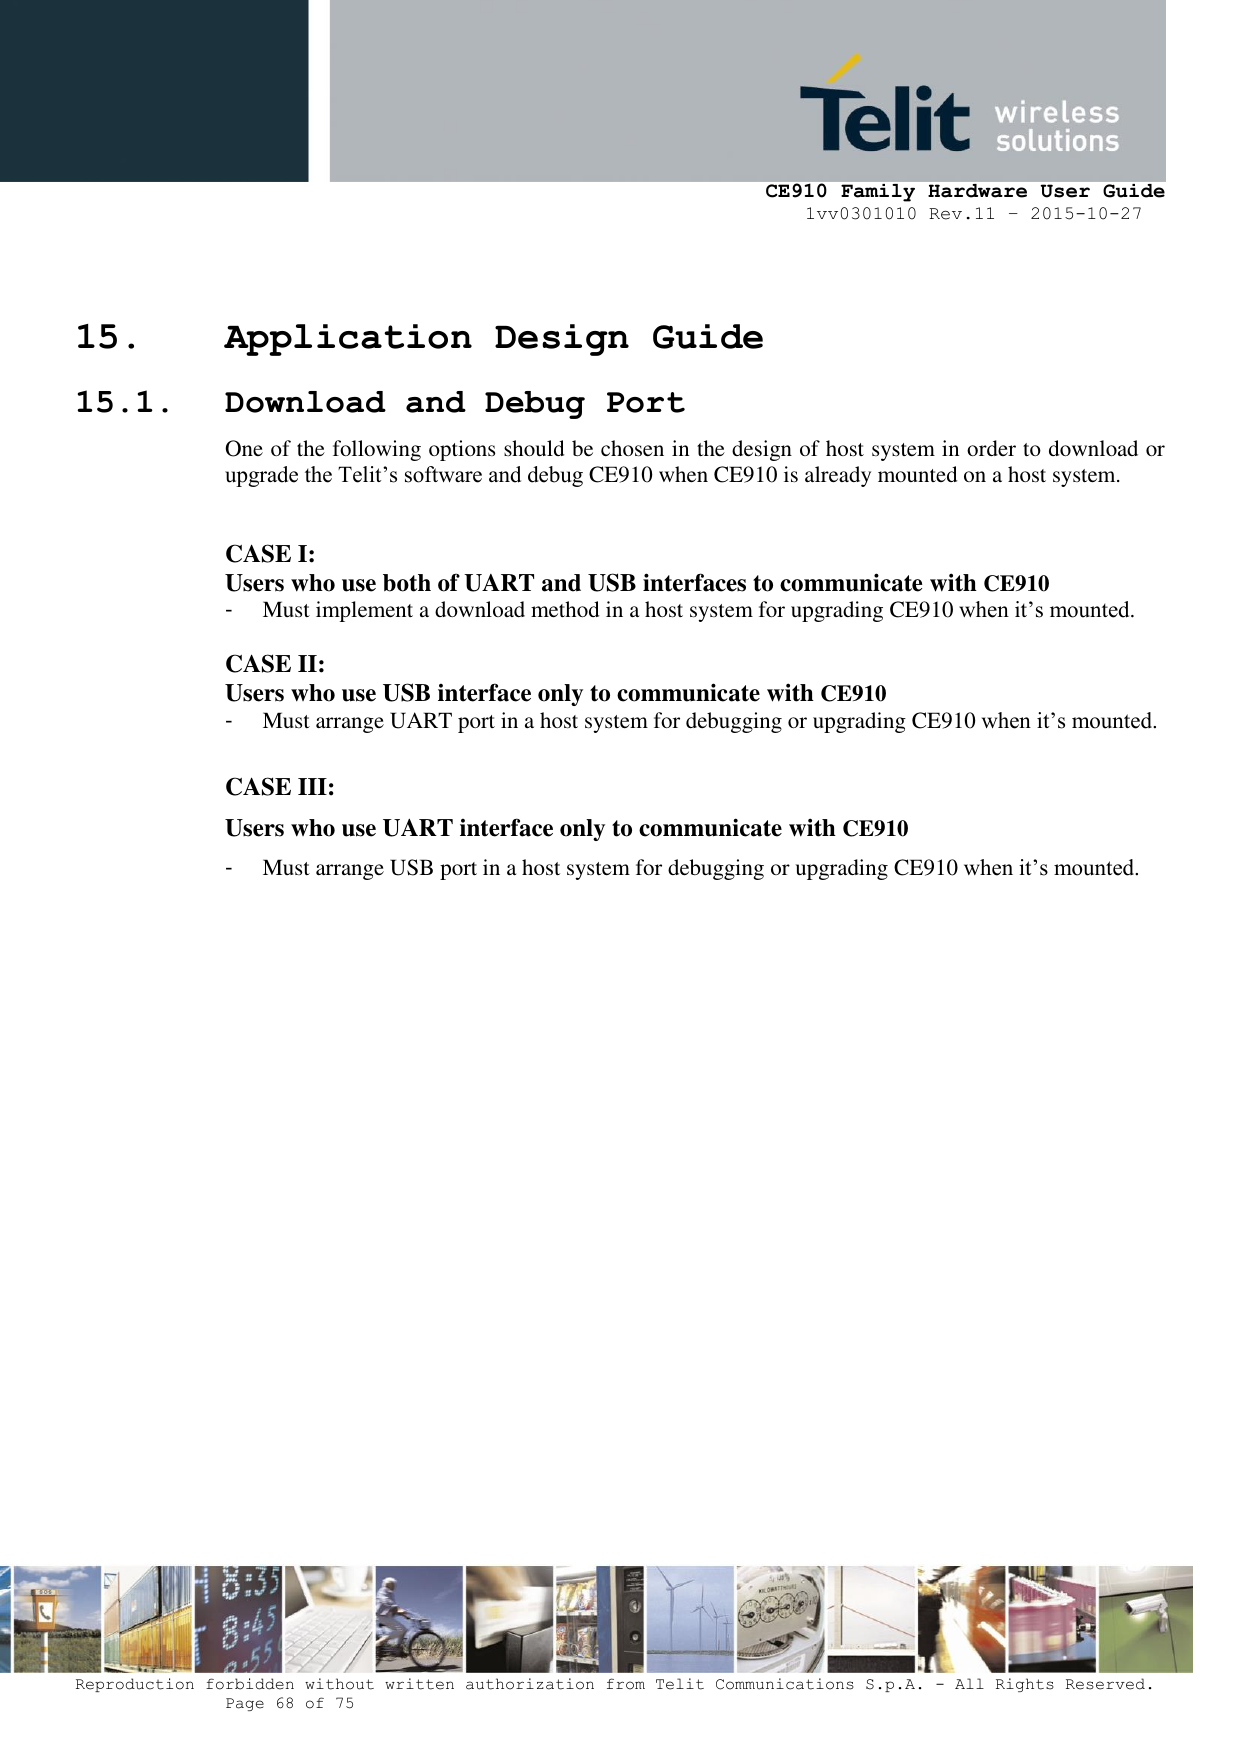     CE910 Family Hardware User Guide 1vv0301010 Rev.11 – 2015-10-27 Reproduction forbidden without written authorization from Telit Communications S.p.A. - All Rights Reserved.    Page 68 of 75                                                     15. Application Design Guide 15.1. Download and Debug Port One of the following options should be chosen in the design of host system in order to download or upgrade the Telit’s software and debug CE910 when CE910 is already mounted on a host system.  CASE I: Users who use both of UART and USB interfaces to communicate with CE910 -  Must implement a download method in a host system for upgrading CE910 when it’s mounted.  CASE II: Users who use USB interface only to communicate with CE910 -  Must arrange UART port in a host system for debugging or upgrading CE910 when it’s mounted.  CASE III: Users who use UART interface only to communicate with CE910 -  Must arrange USB port in a host system for debugging or upgrading CE910 when it’s mounted.       